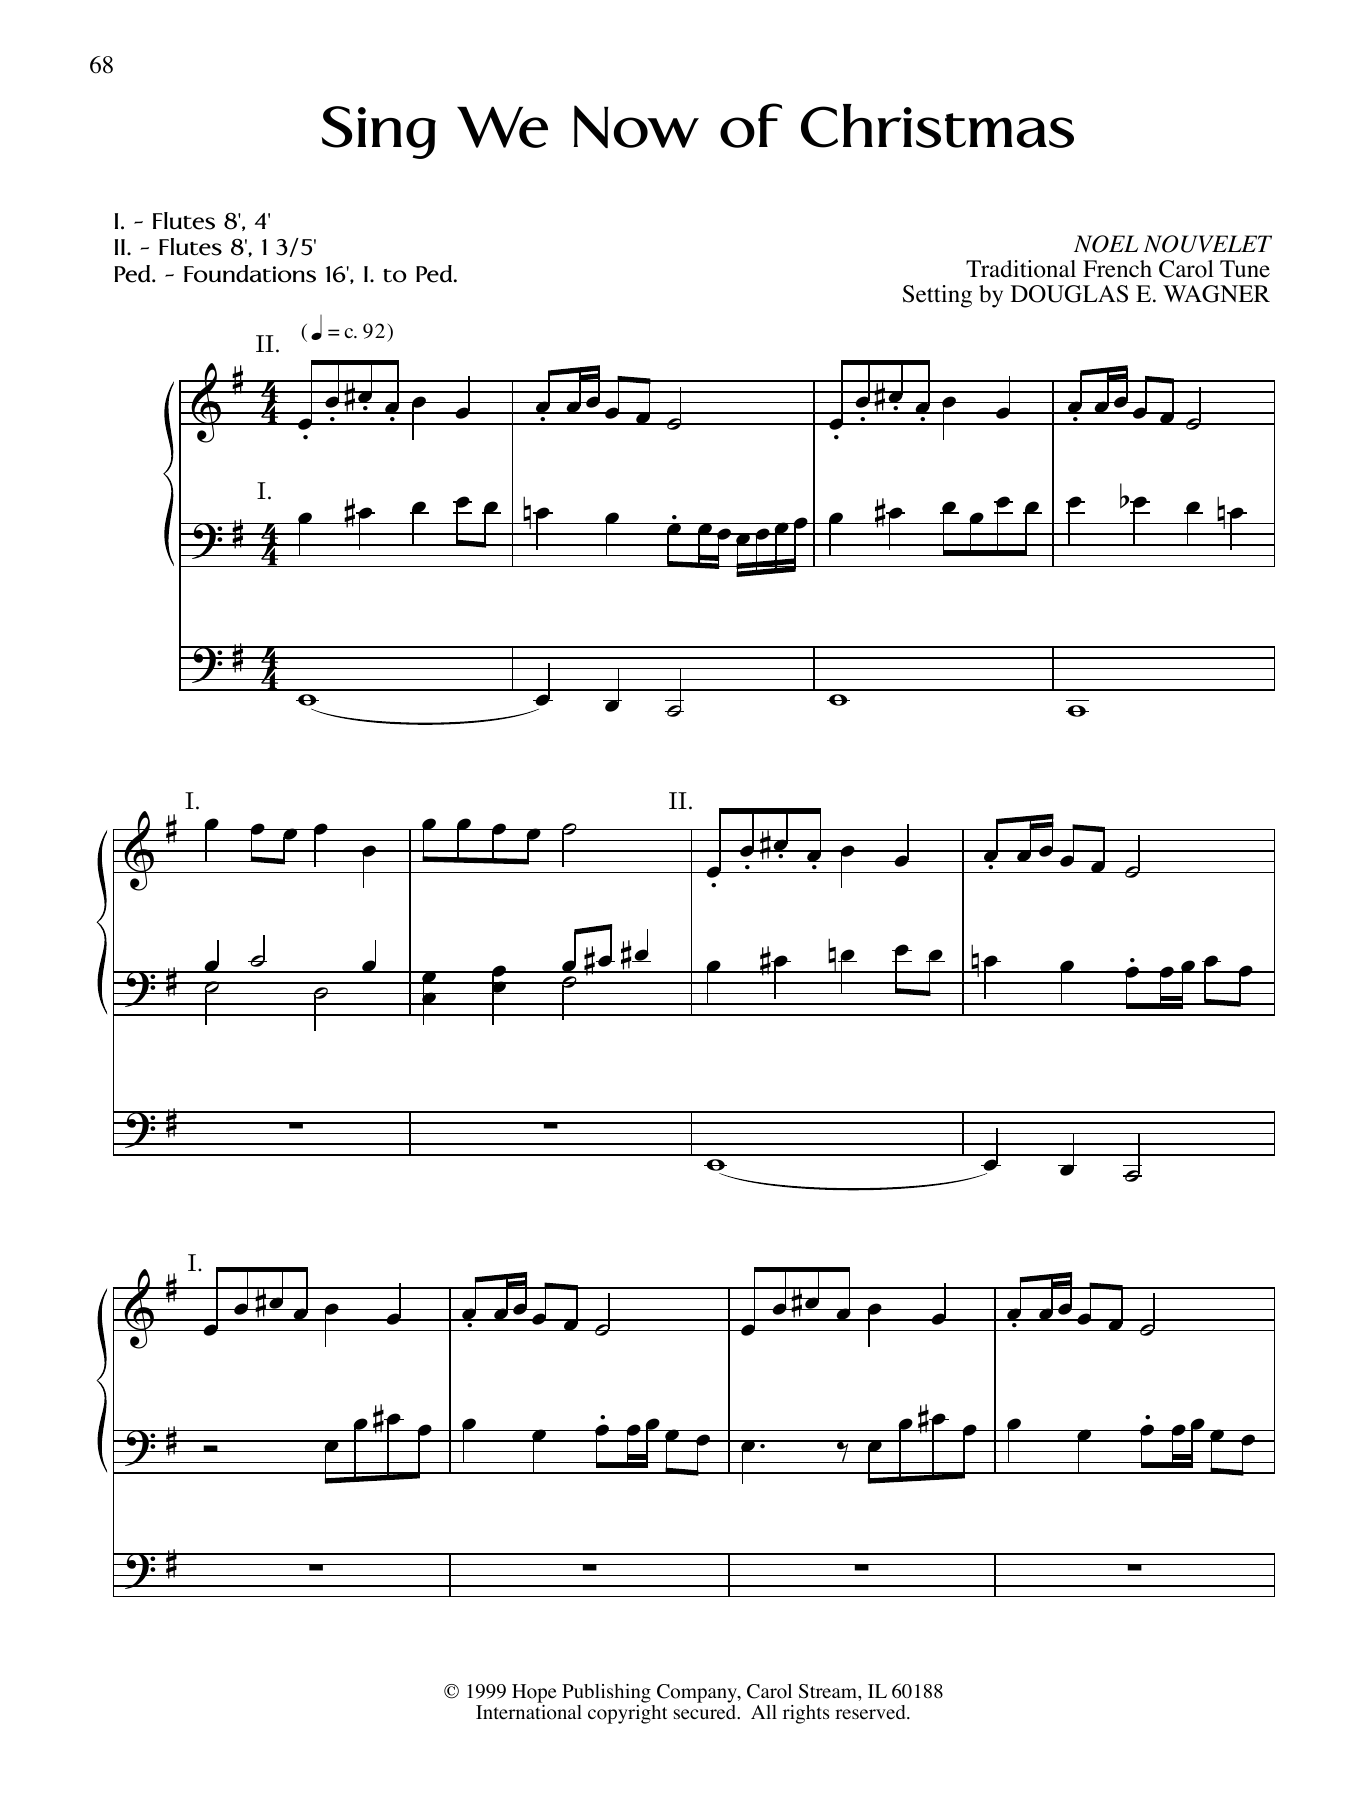 Download Douglas E. Wagner Sing We Now of Chistmas Sheet Music